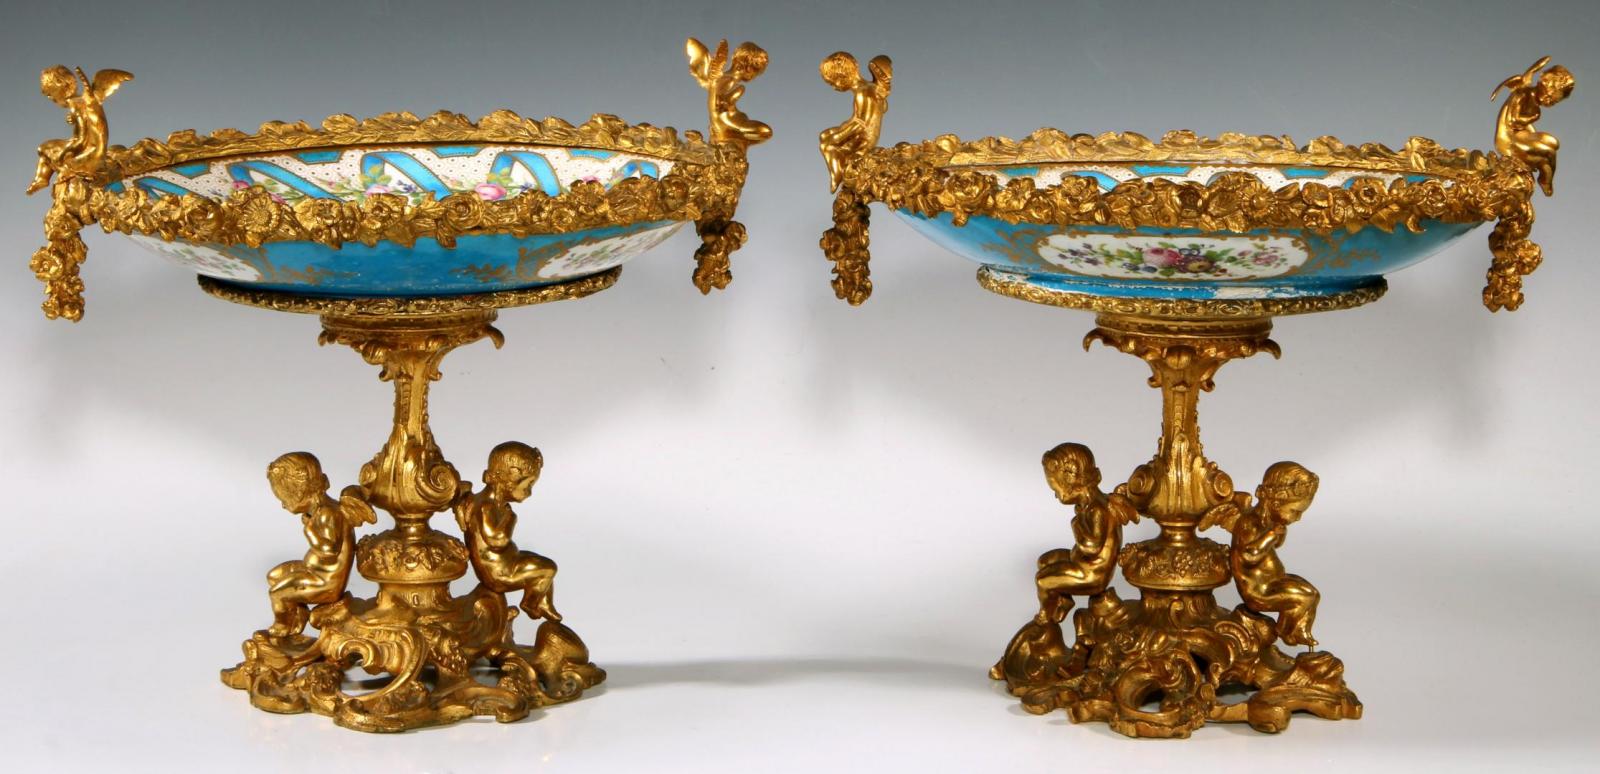 A PAIR OF ORMOLU-MOUNTED FRENCH PLATE CENTERPIECES